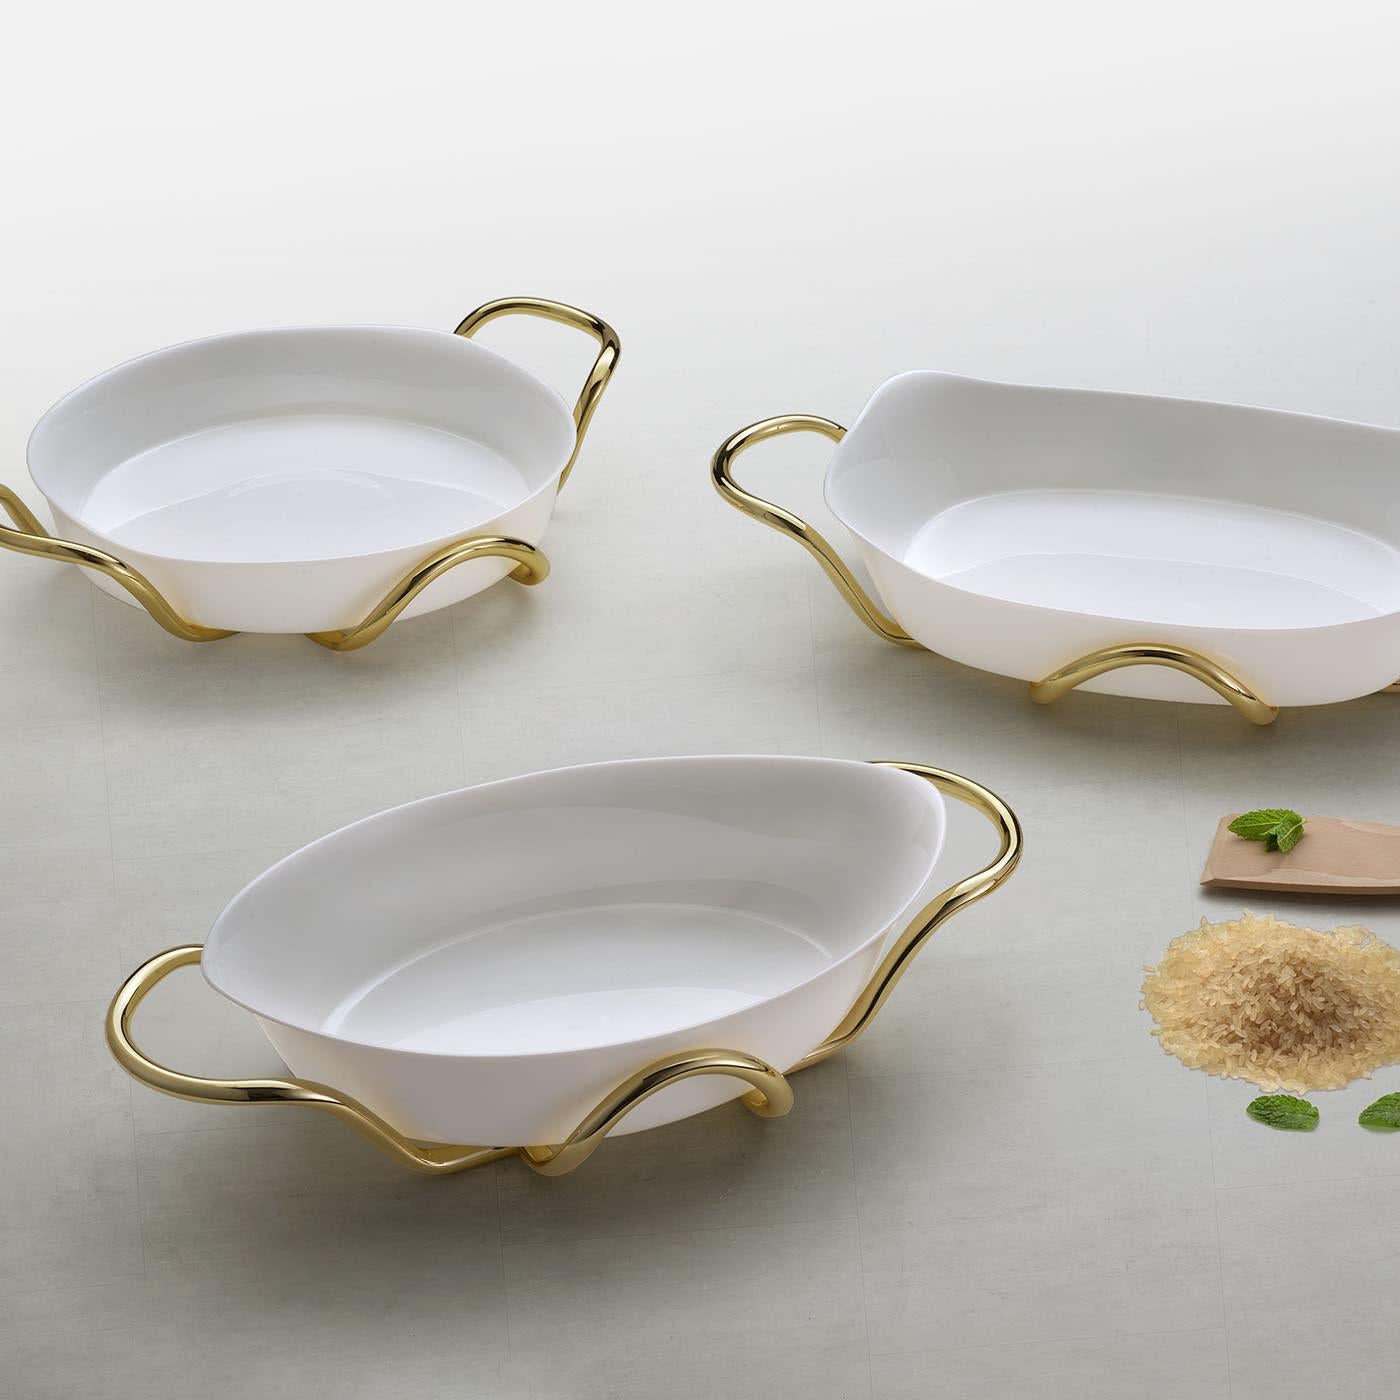 A cylindrical structure marked by sinuous curves and flaunting a gleaming golden finish defines the brass holder here welcoming a round ceramic baking dish. The combination of these two elements allows for elegantly and safely serving food just